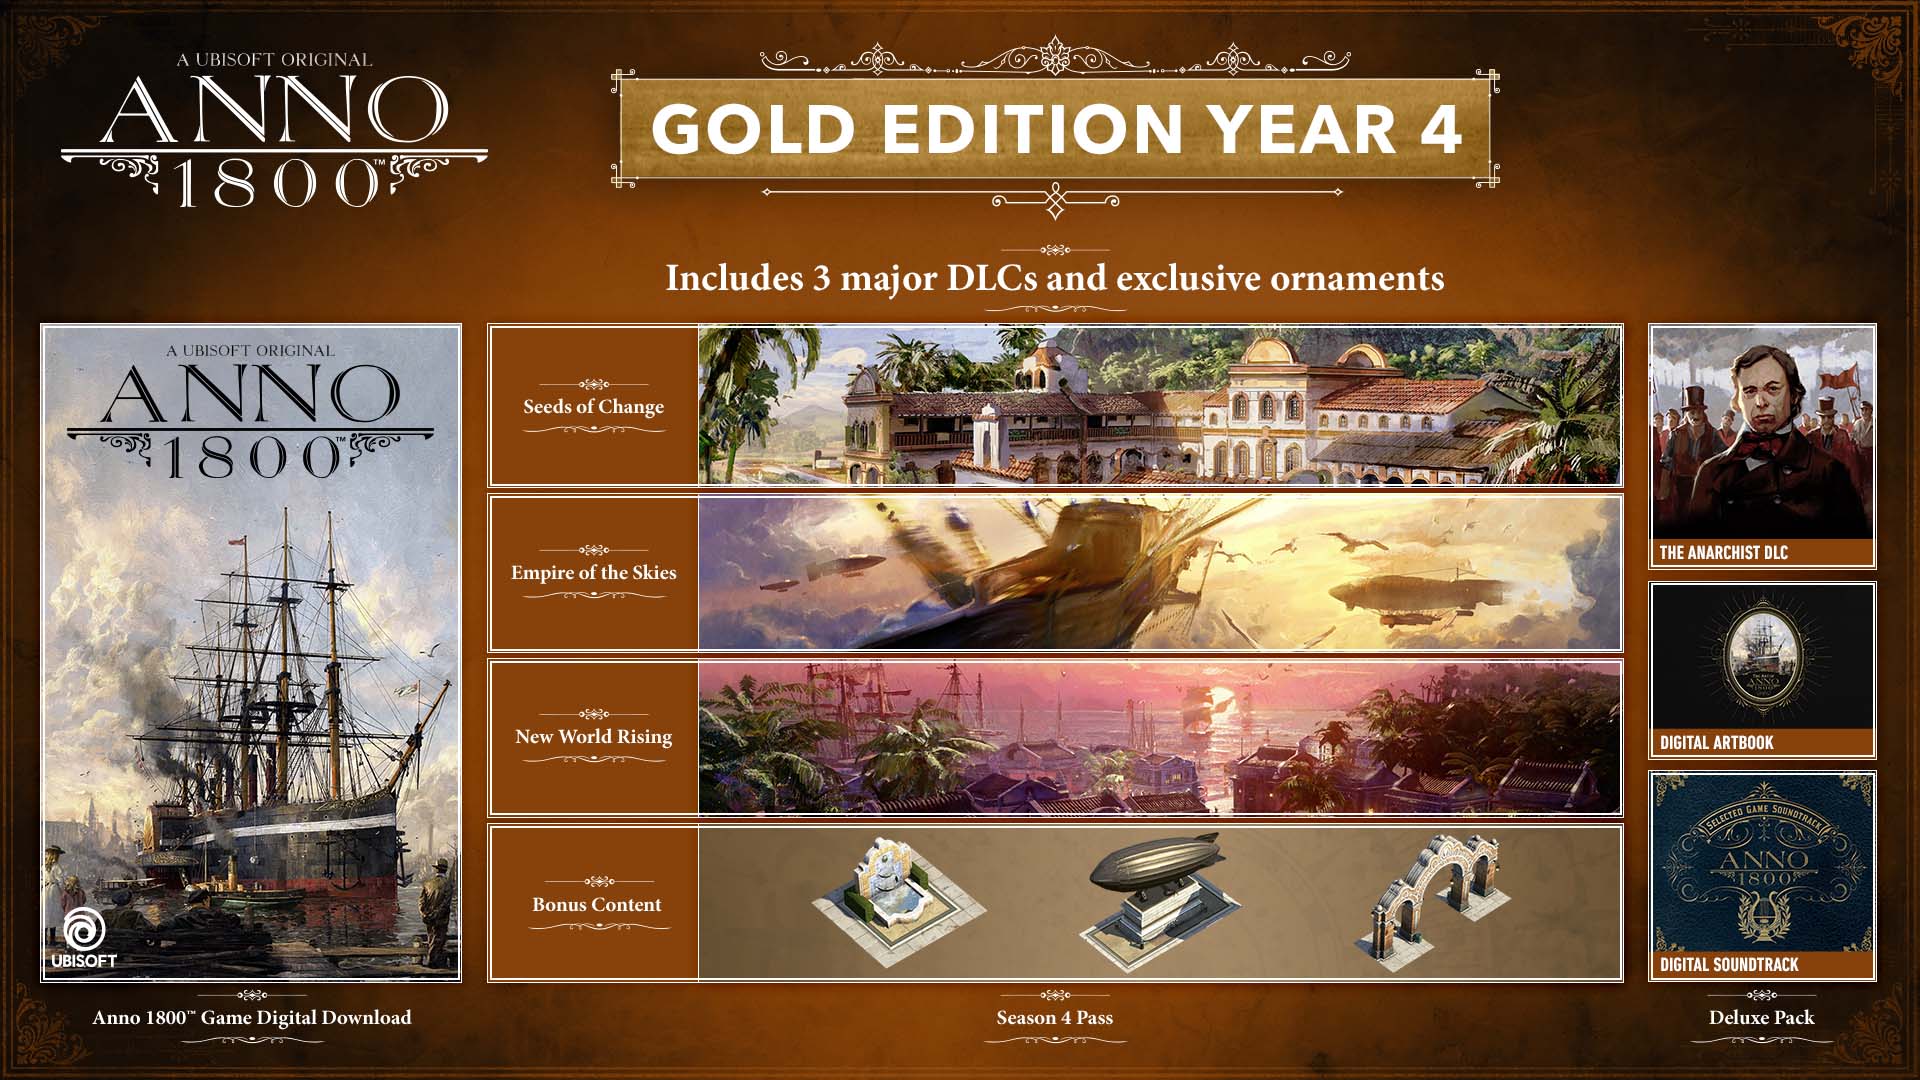 Anno 1800 All Dlcs Content of Anno 1800 editions | Ubisoft Help